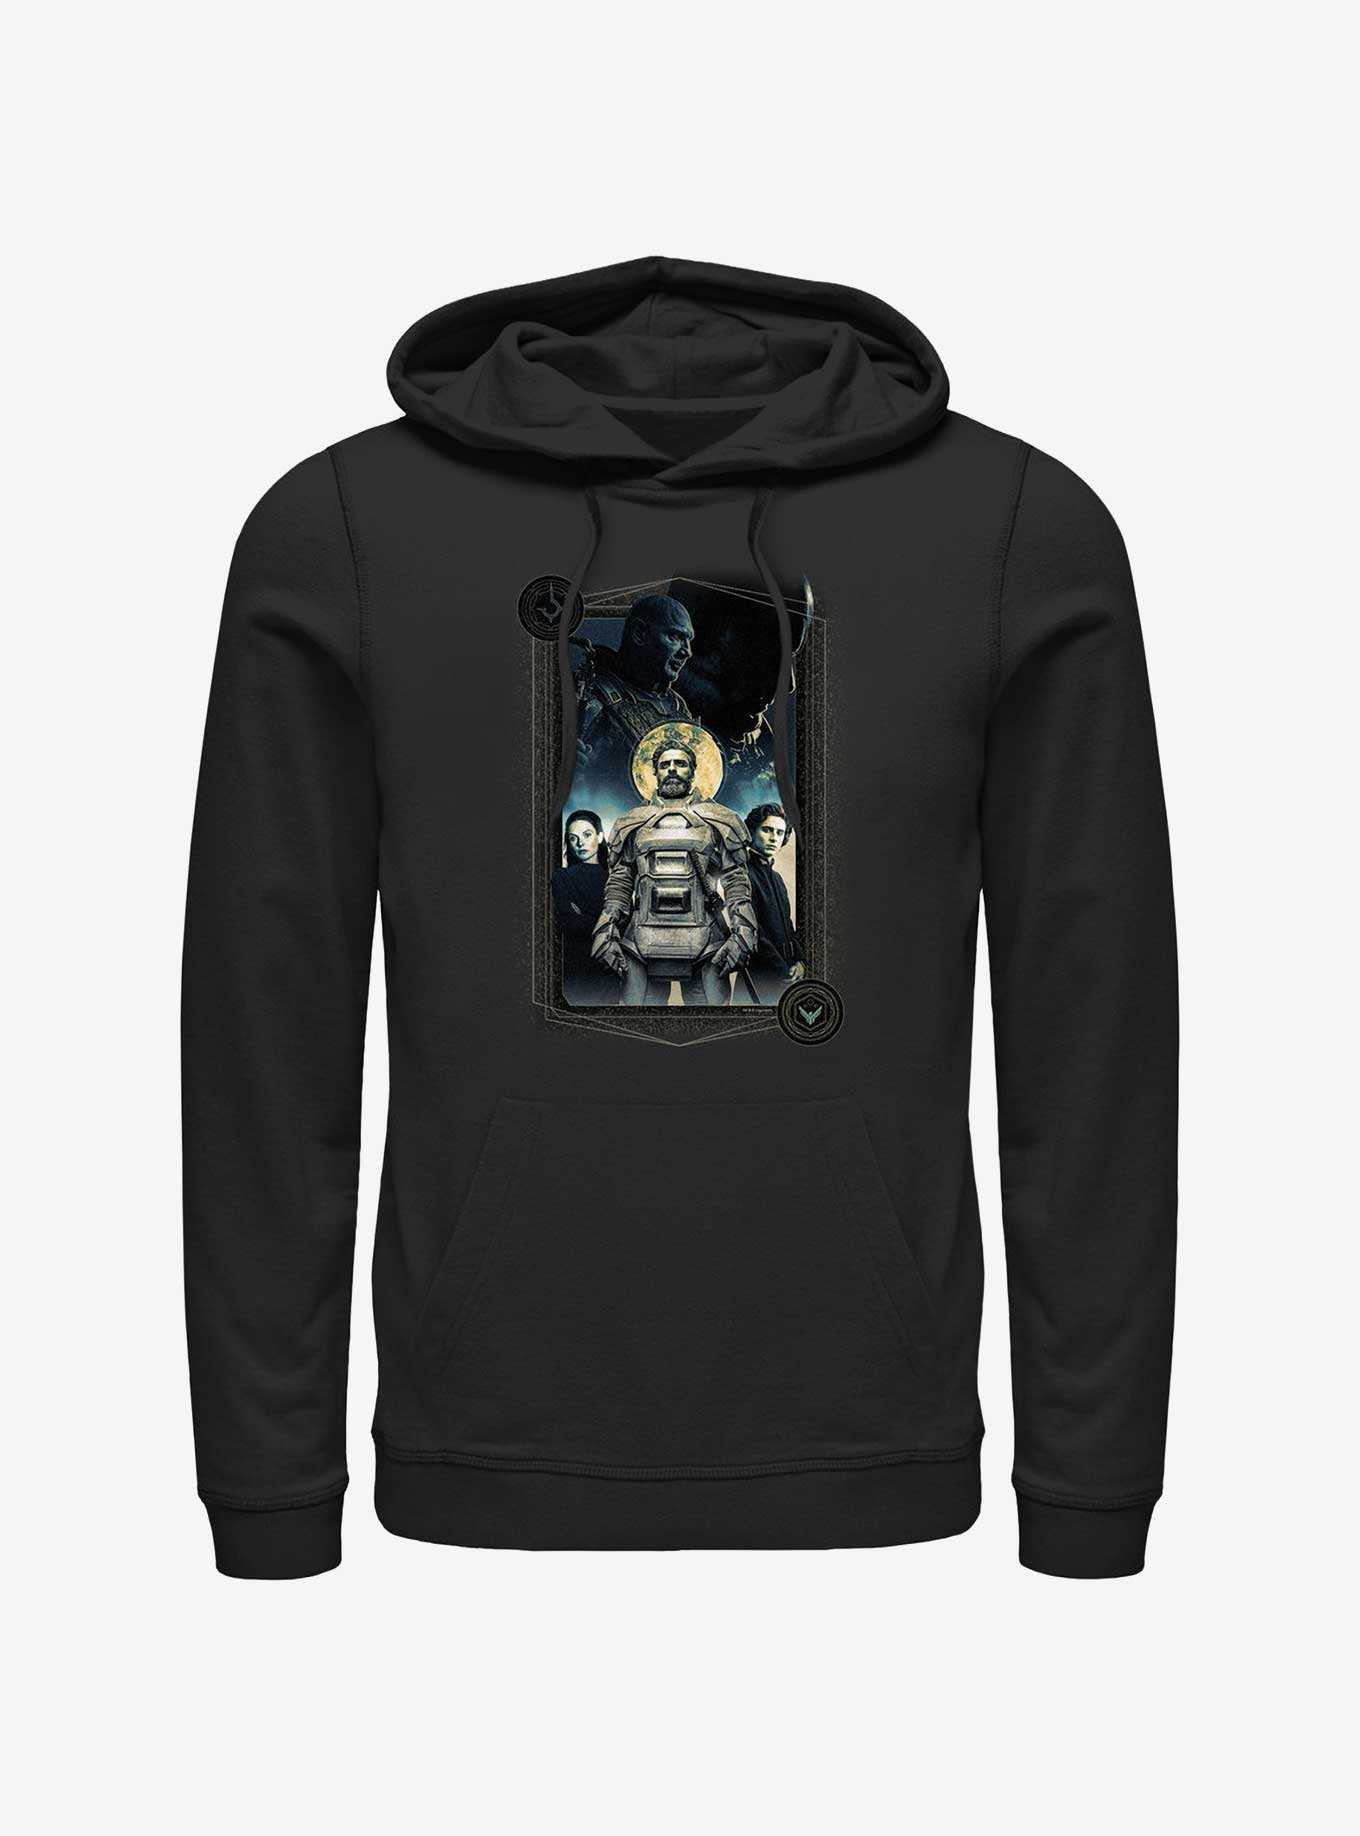 Dune: Part Two Character Poster Hoodie, , hi-res